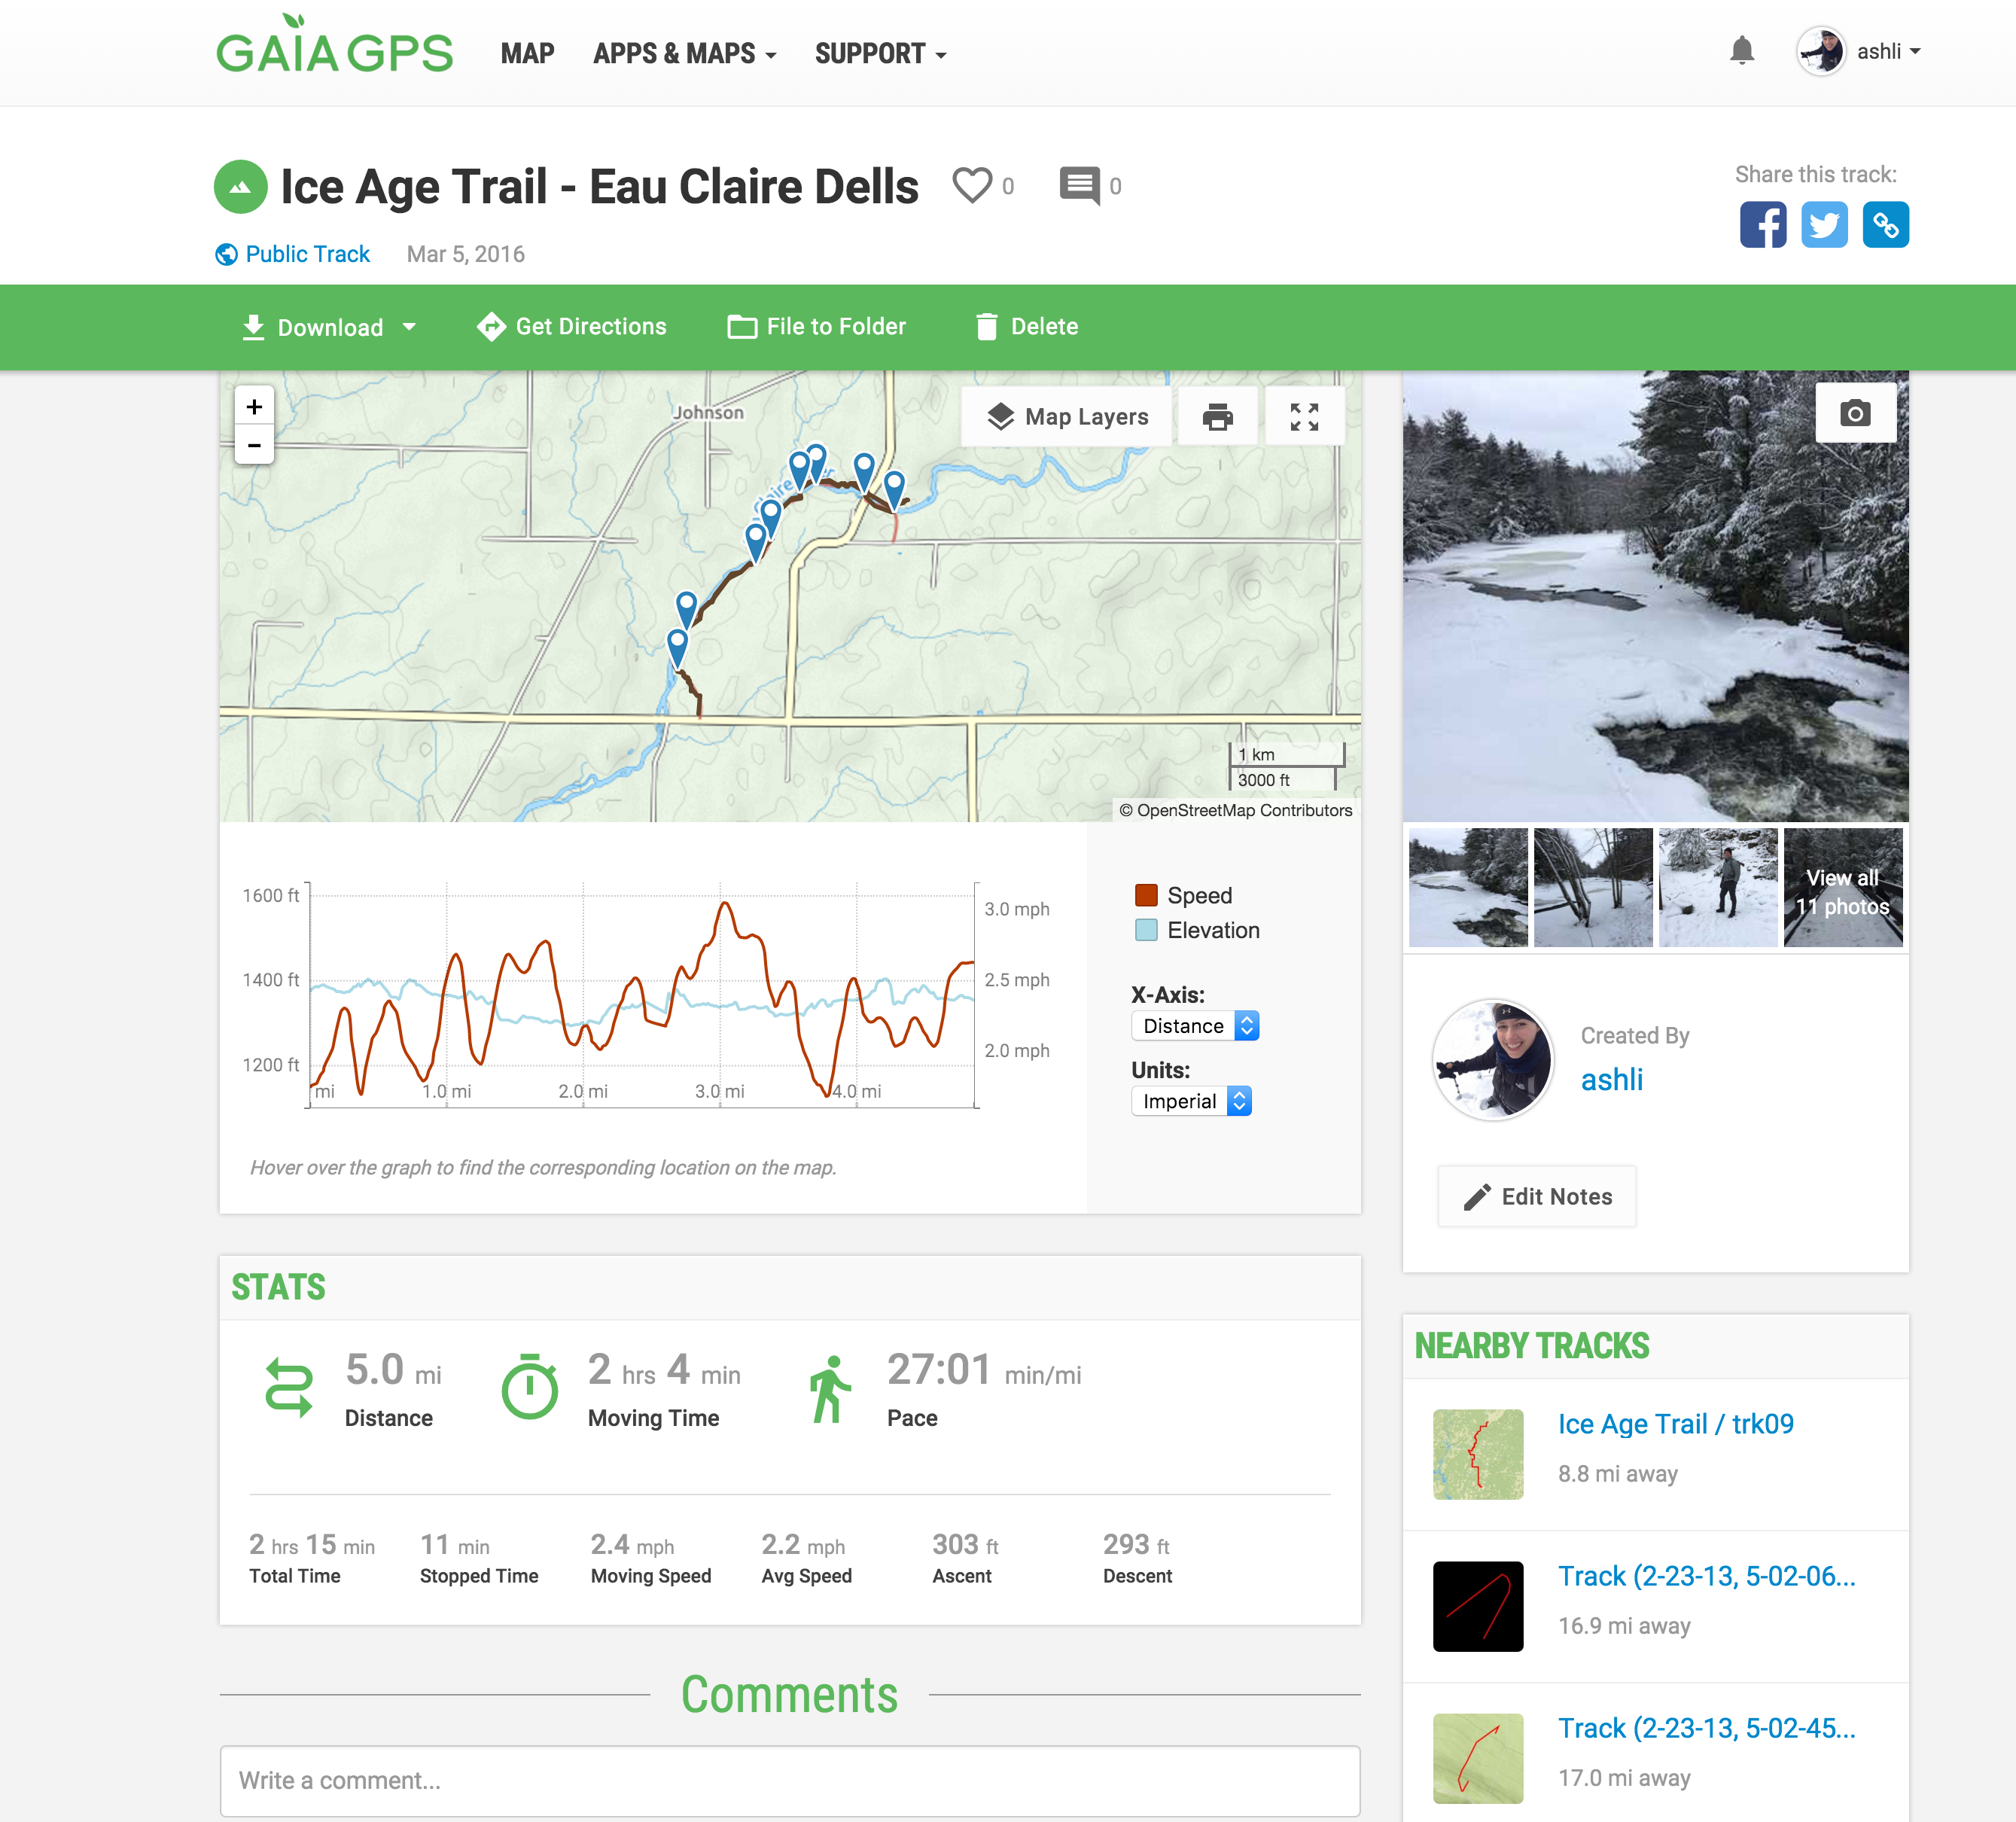 Gaia GPS Track Page Redesign